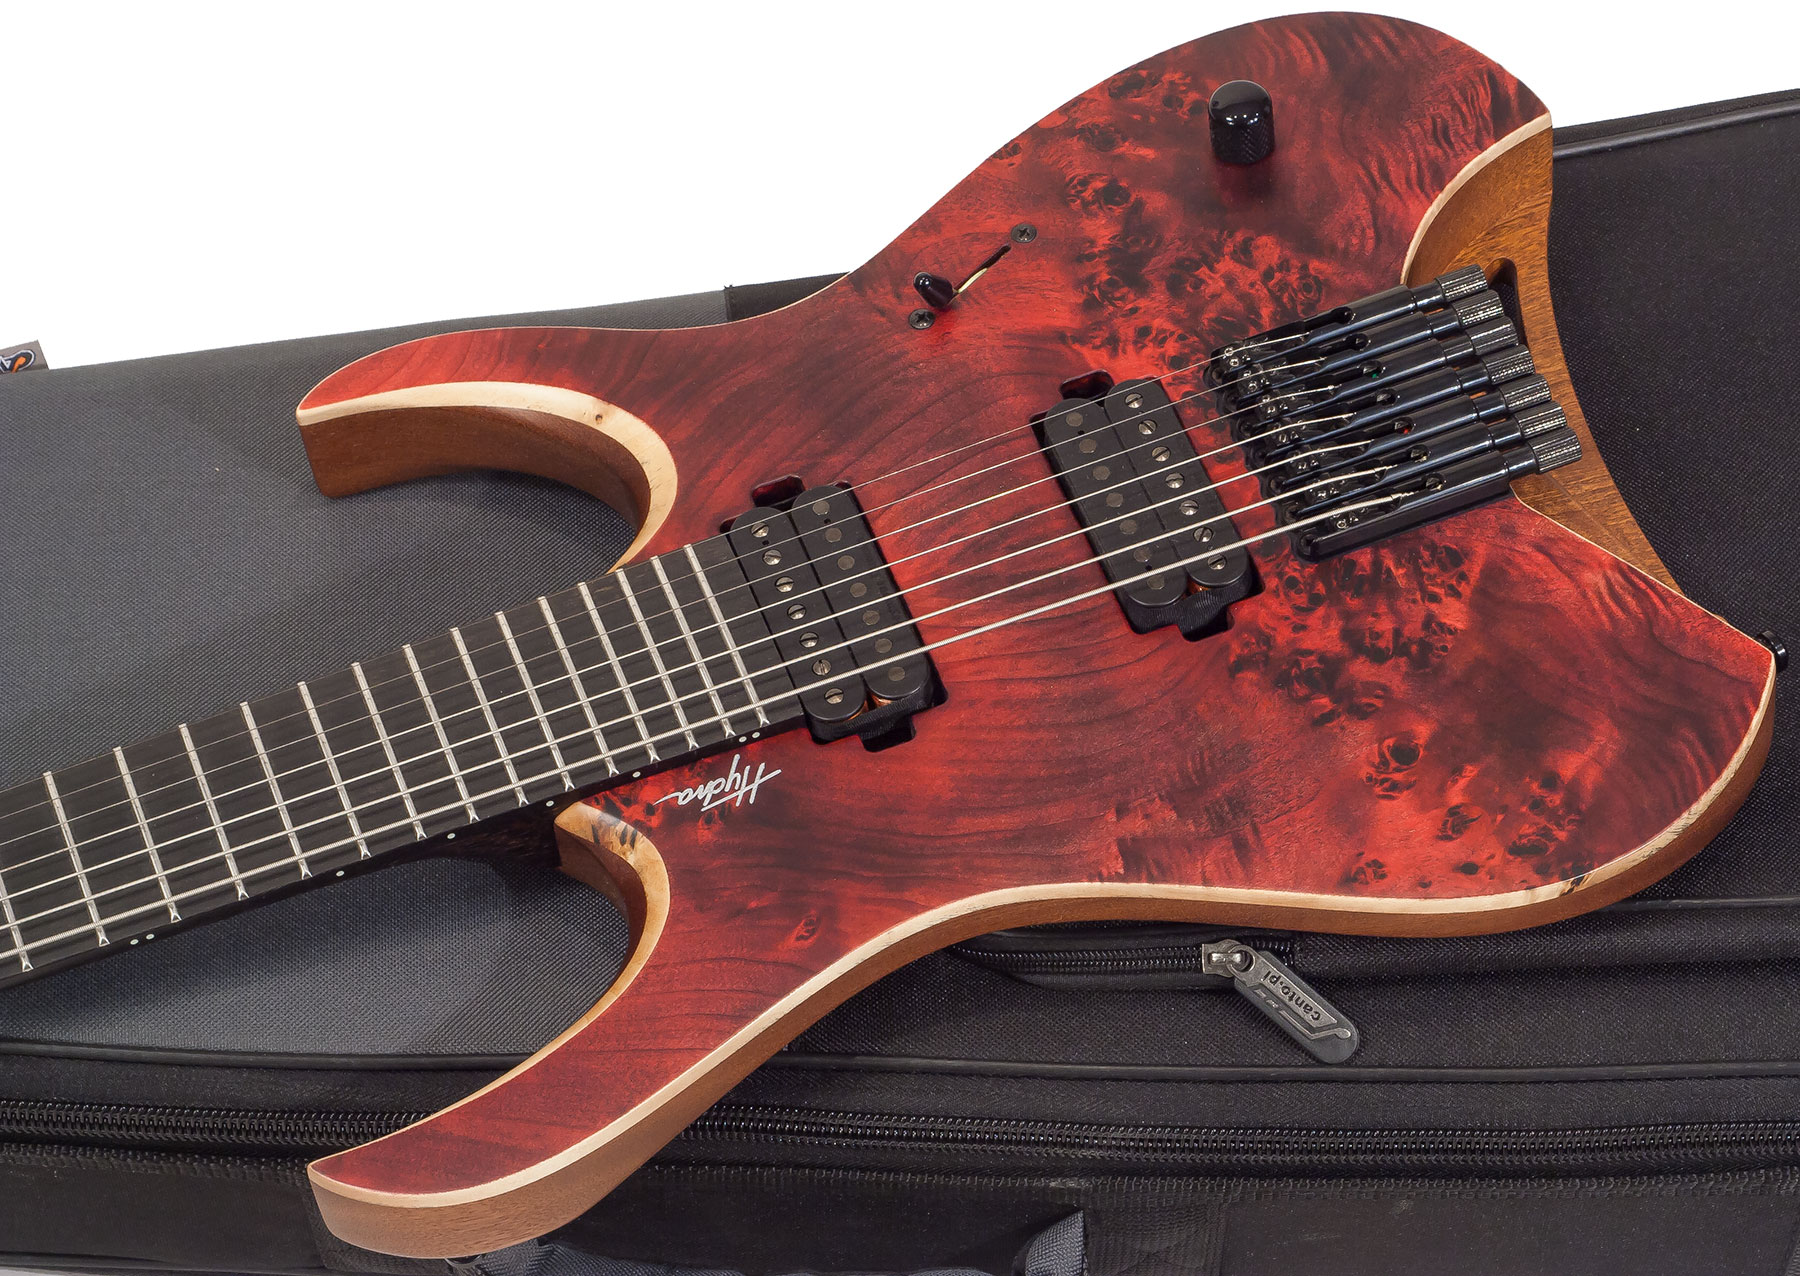 Mayones Guitars Hydra Elite 7 2h Seymour Duncan Ht Eb - Dirty Red Satin - 7 string electric guitar - Variation 2